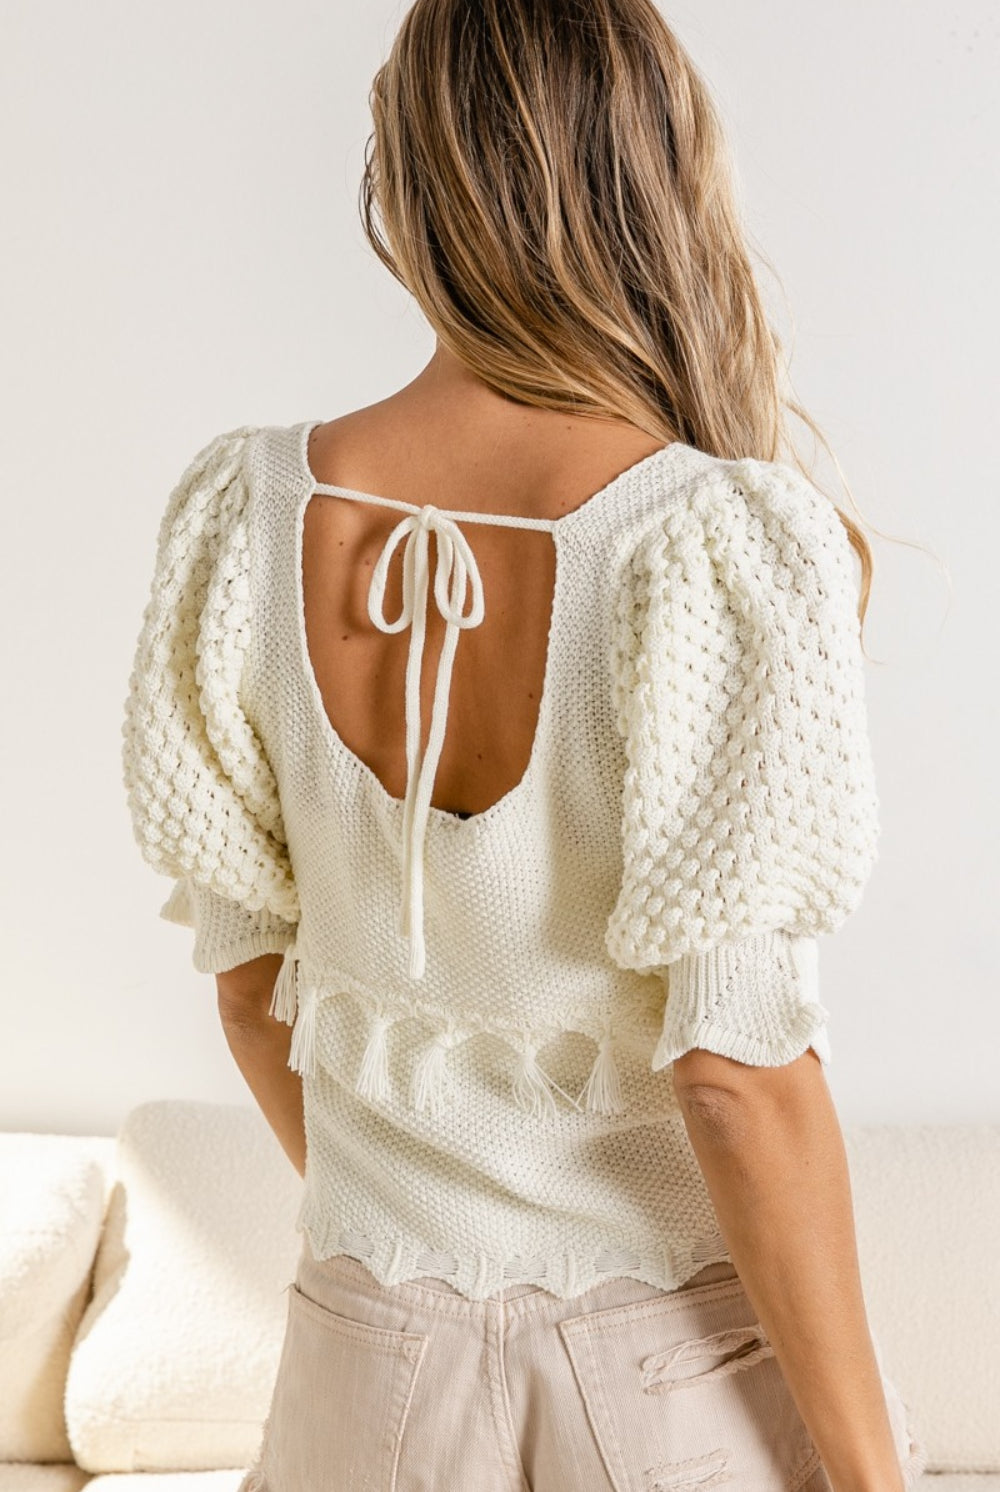 A woman models a textured tassel sweater with puff sleeves and a round neckline, styled with frayed light beige shorts for a cozy yet chic look.